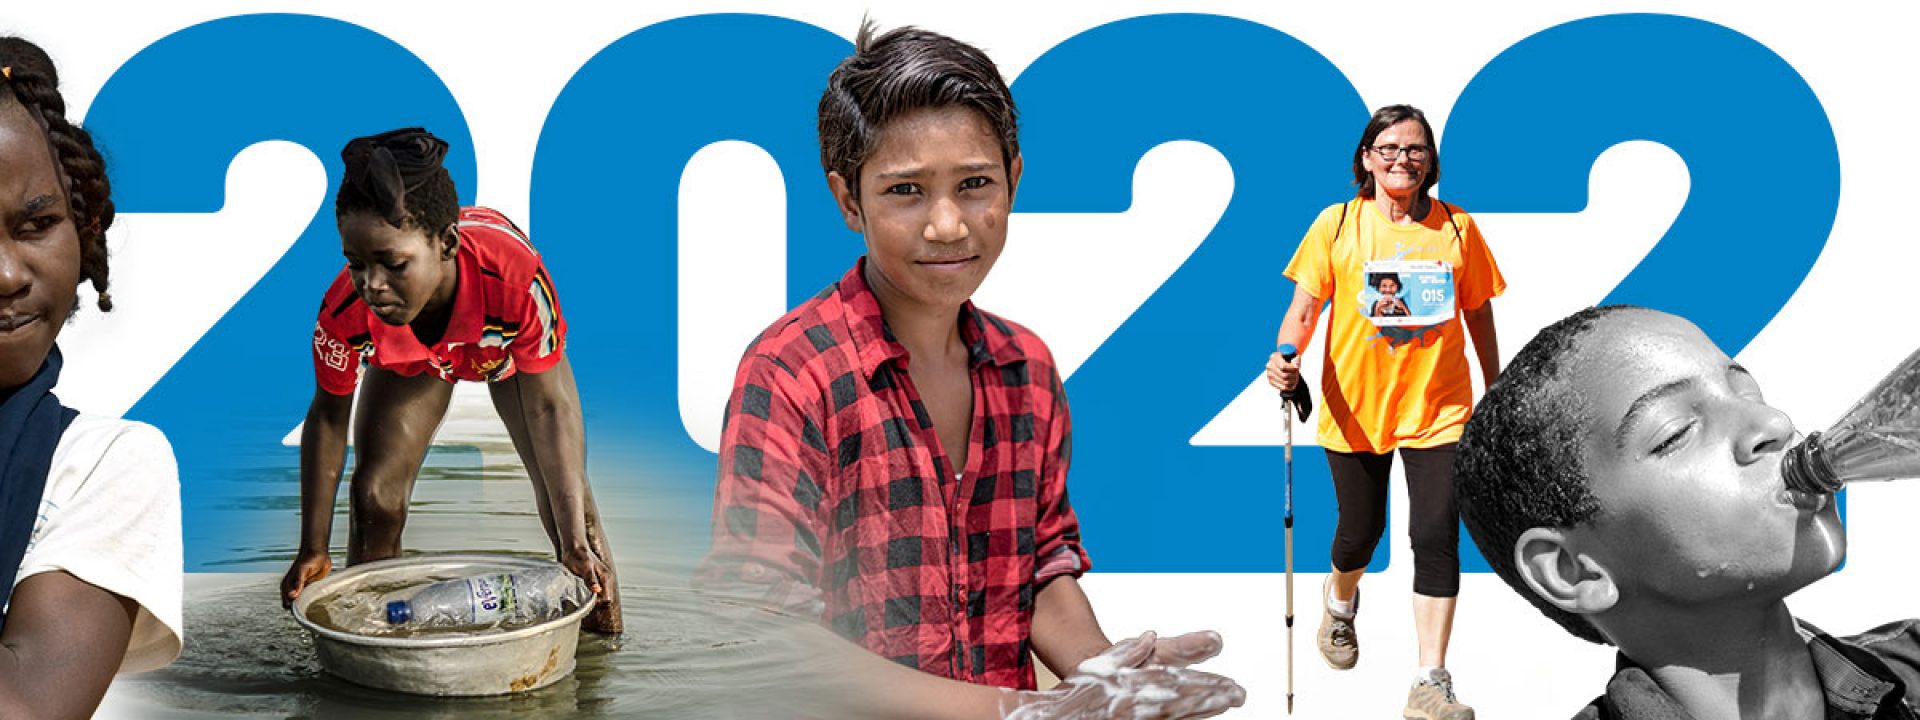 2023, the year in which water must be the solution